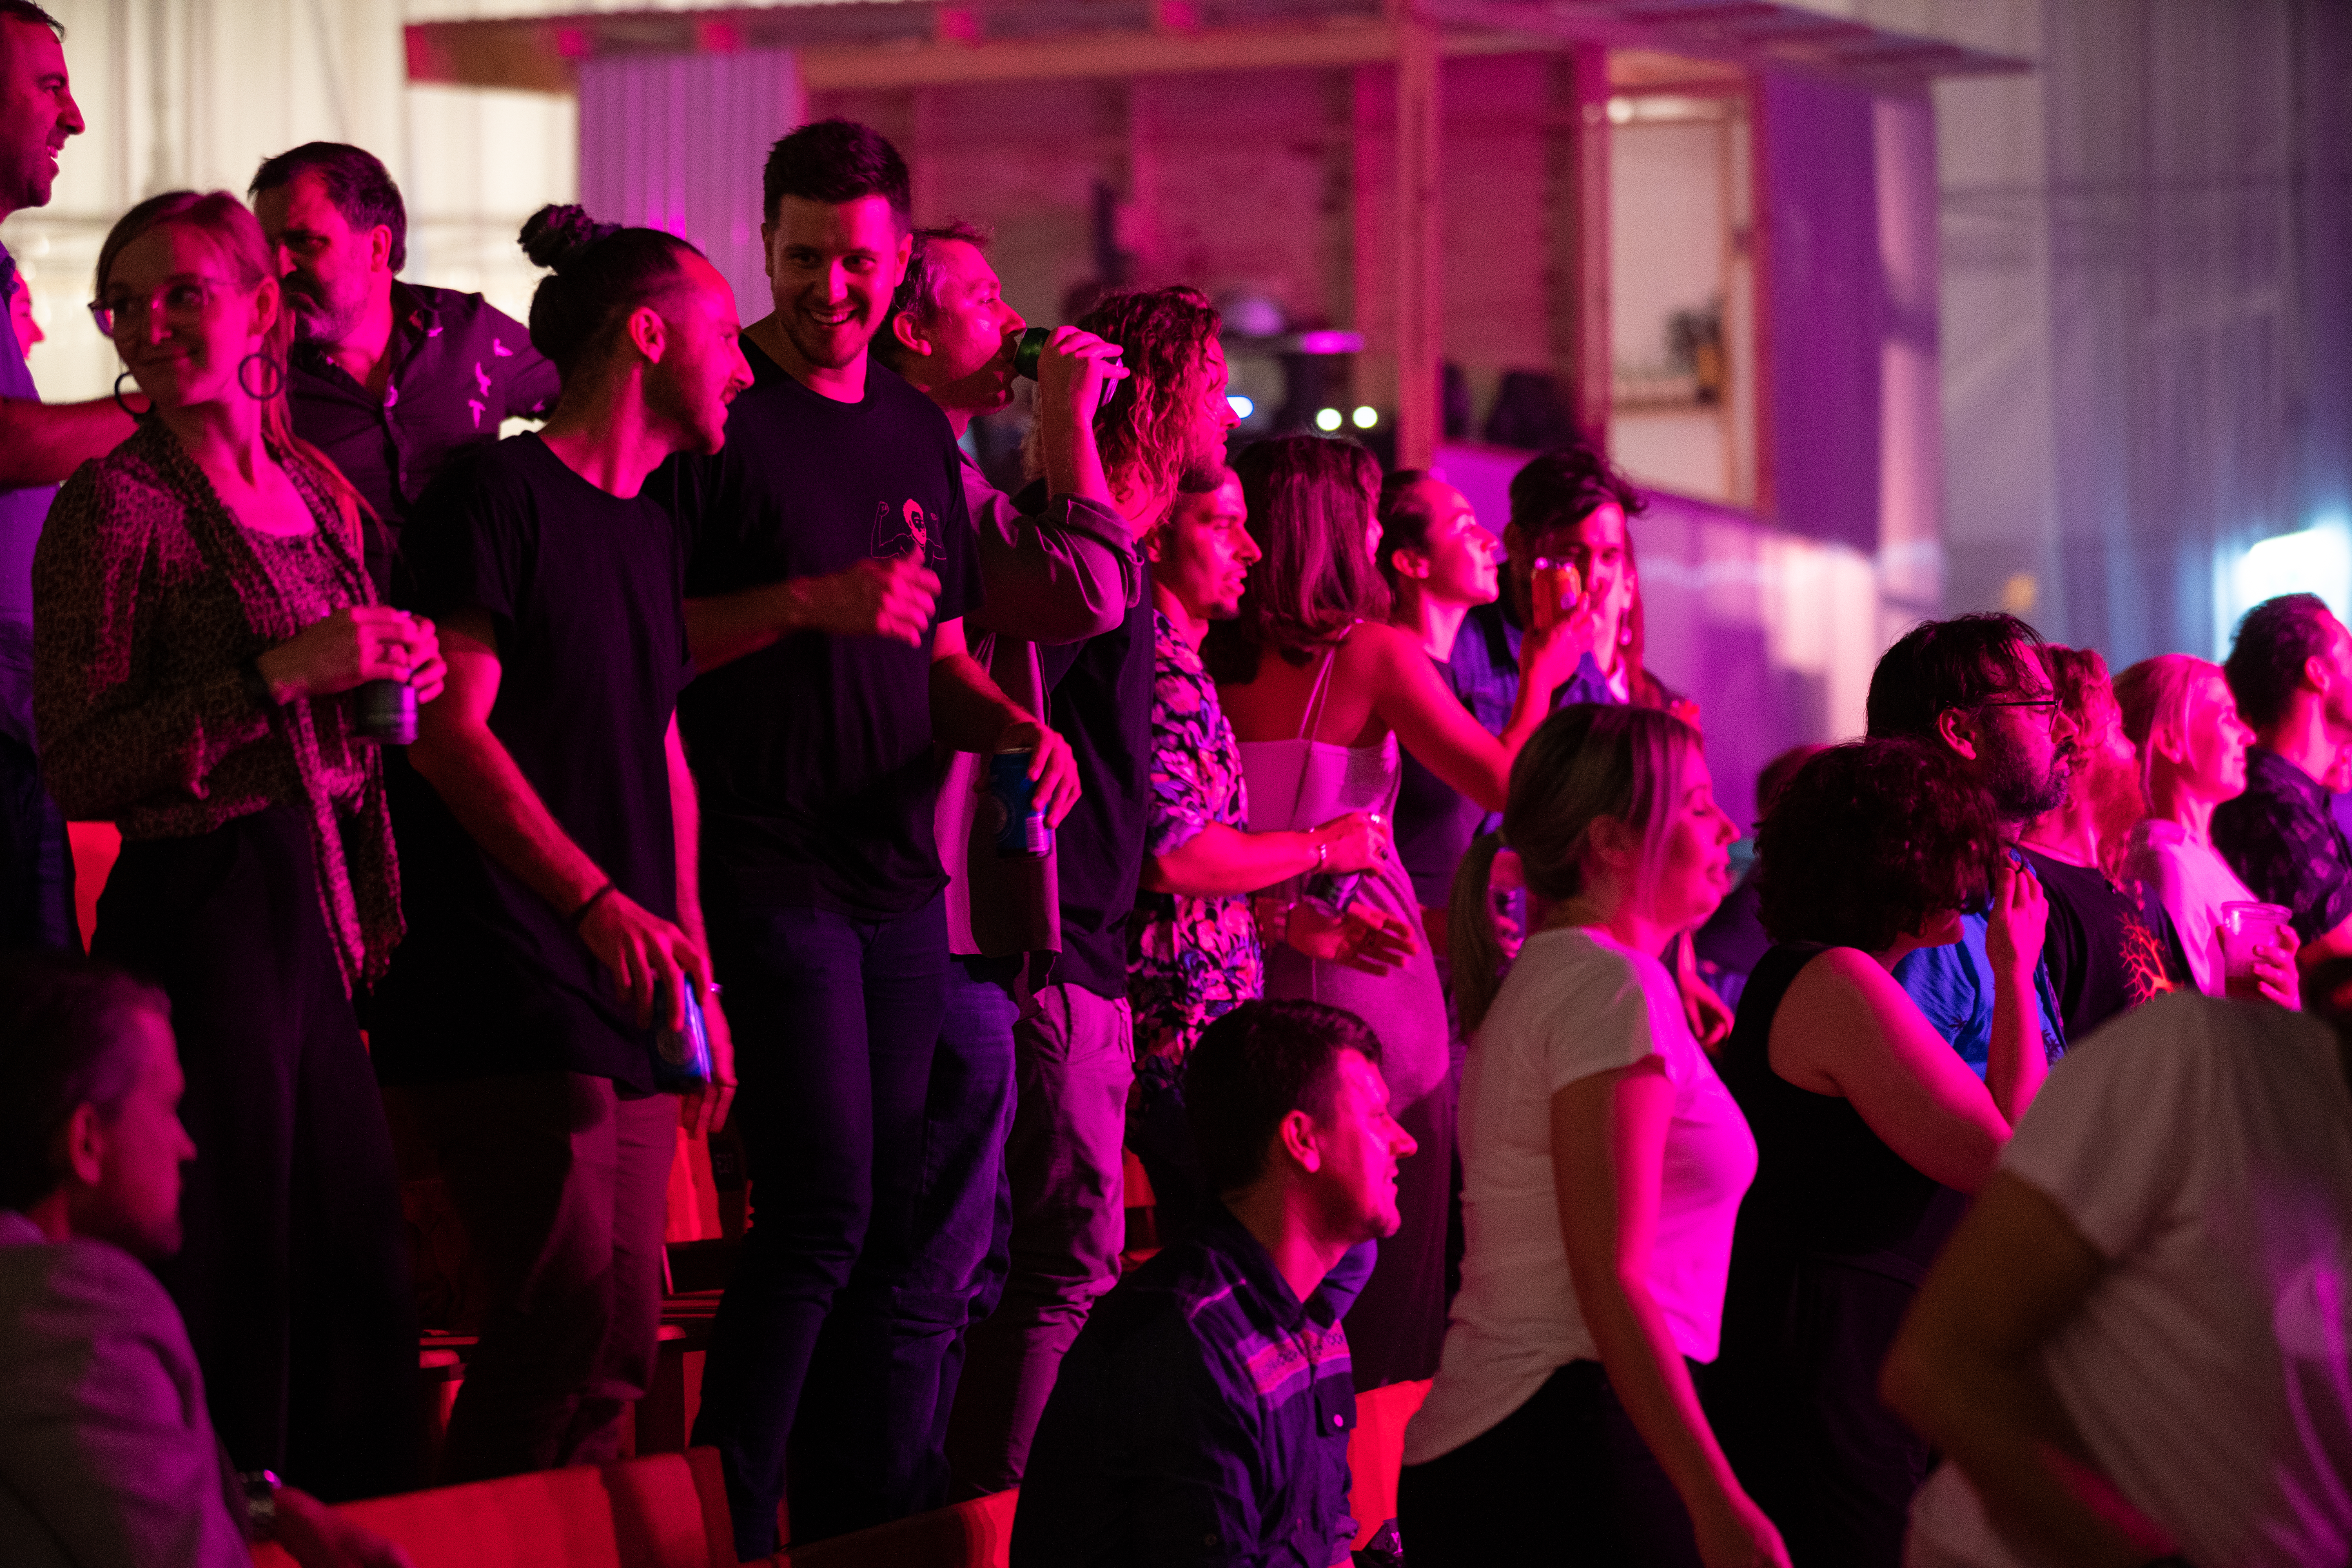 A group of young people watch a performance on stage. They're smiling and bathed in pink light.